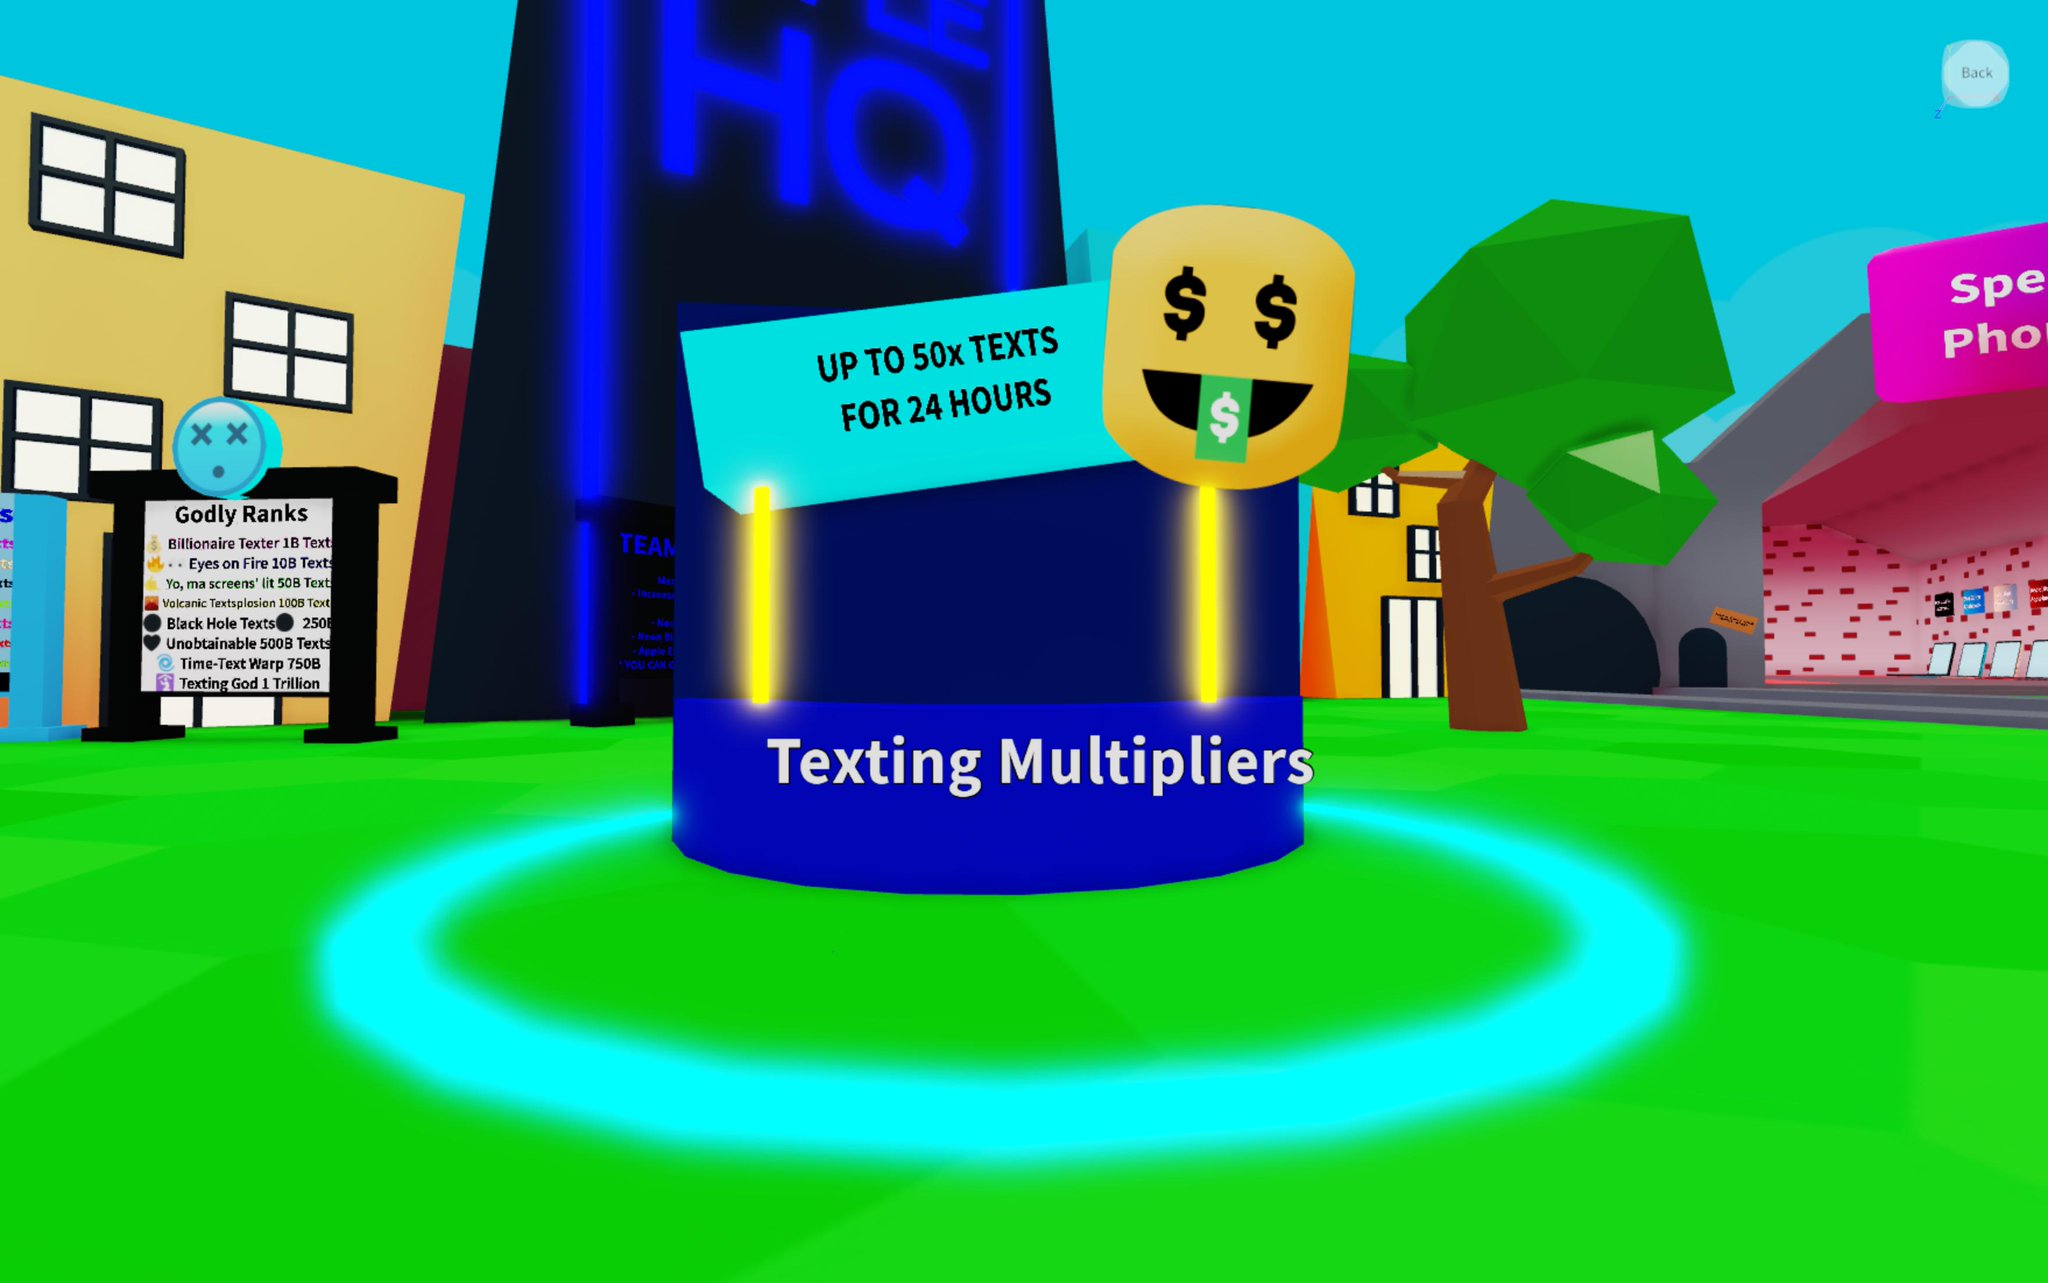 Ricky On Twitter Want Your Avatar In Texting Simulator Reply With The Link To Your Roblox Character And You Might Become The Next Shop Keeper We Ll Give A Shout Out To Whoever - ᴅᴀɴɪᴋᴀ on twitter me editing roblox myths more